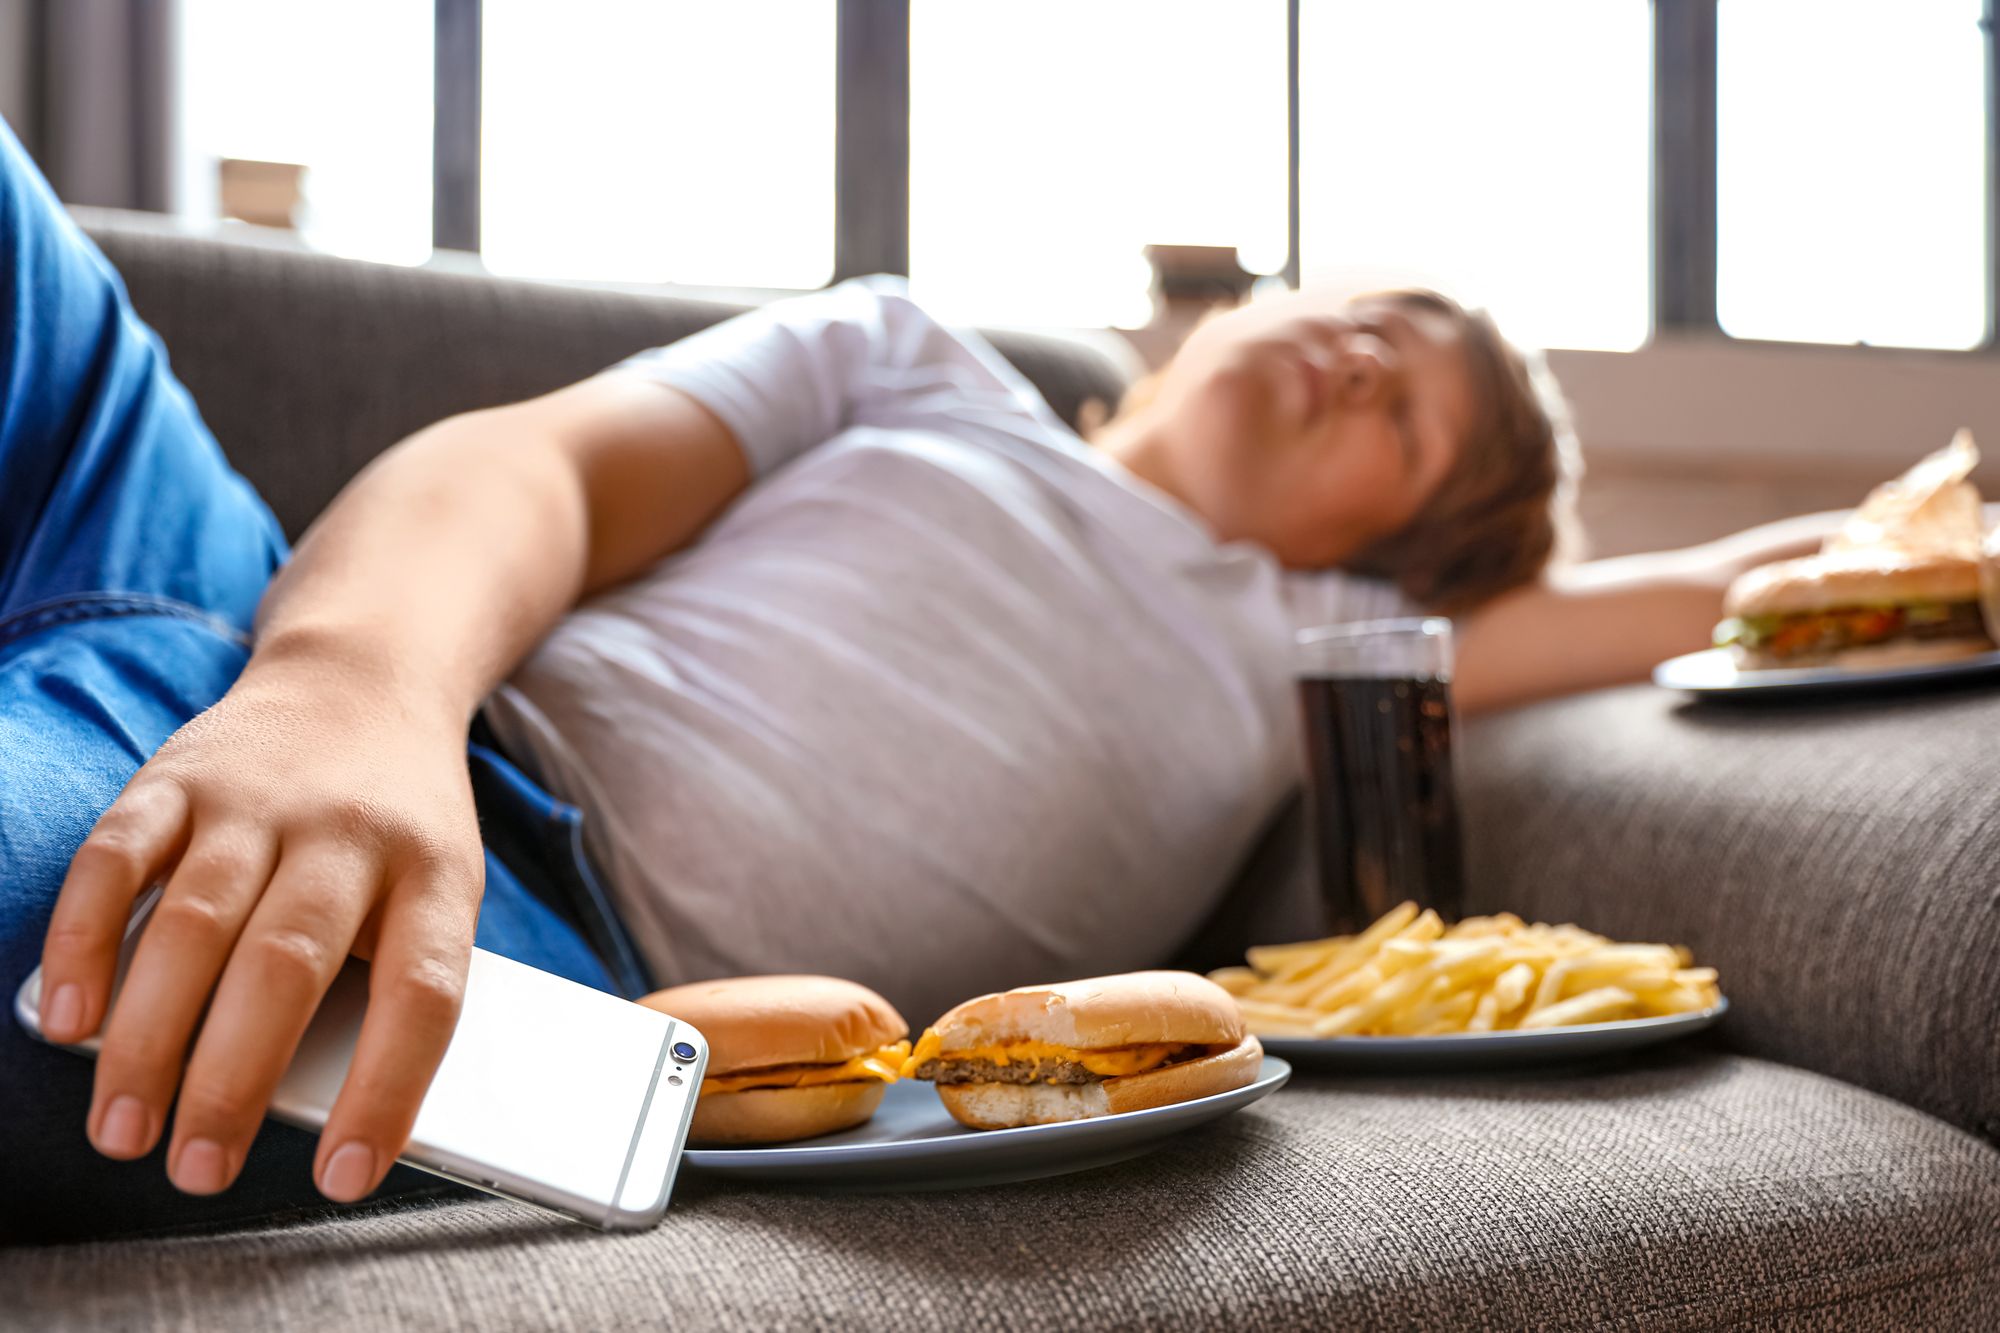 Child Obesity Screen Time